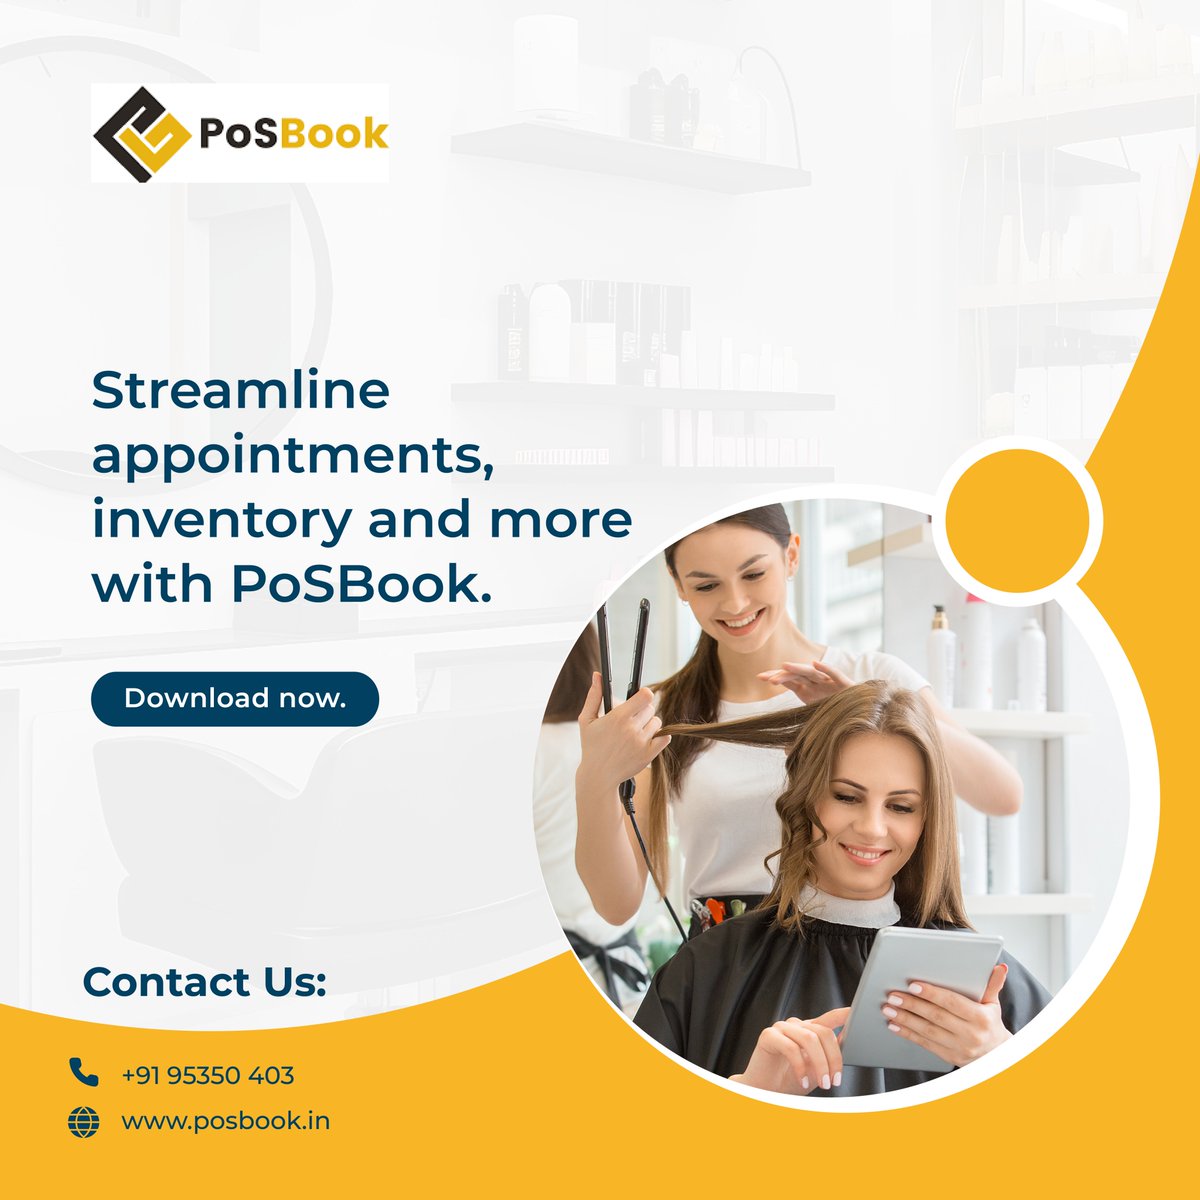 Ready to take your salon to the next level? 💇‍♀💅 Introducing Posbook salon management software!

#salonsoftware #salonowner #salonservices #salonmanagement #BusinessProductivity #beautyindustryprofessionals #beautyindustry #bookkeeping #accountingsoftware #SalonAndSpaSoftware